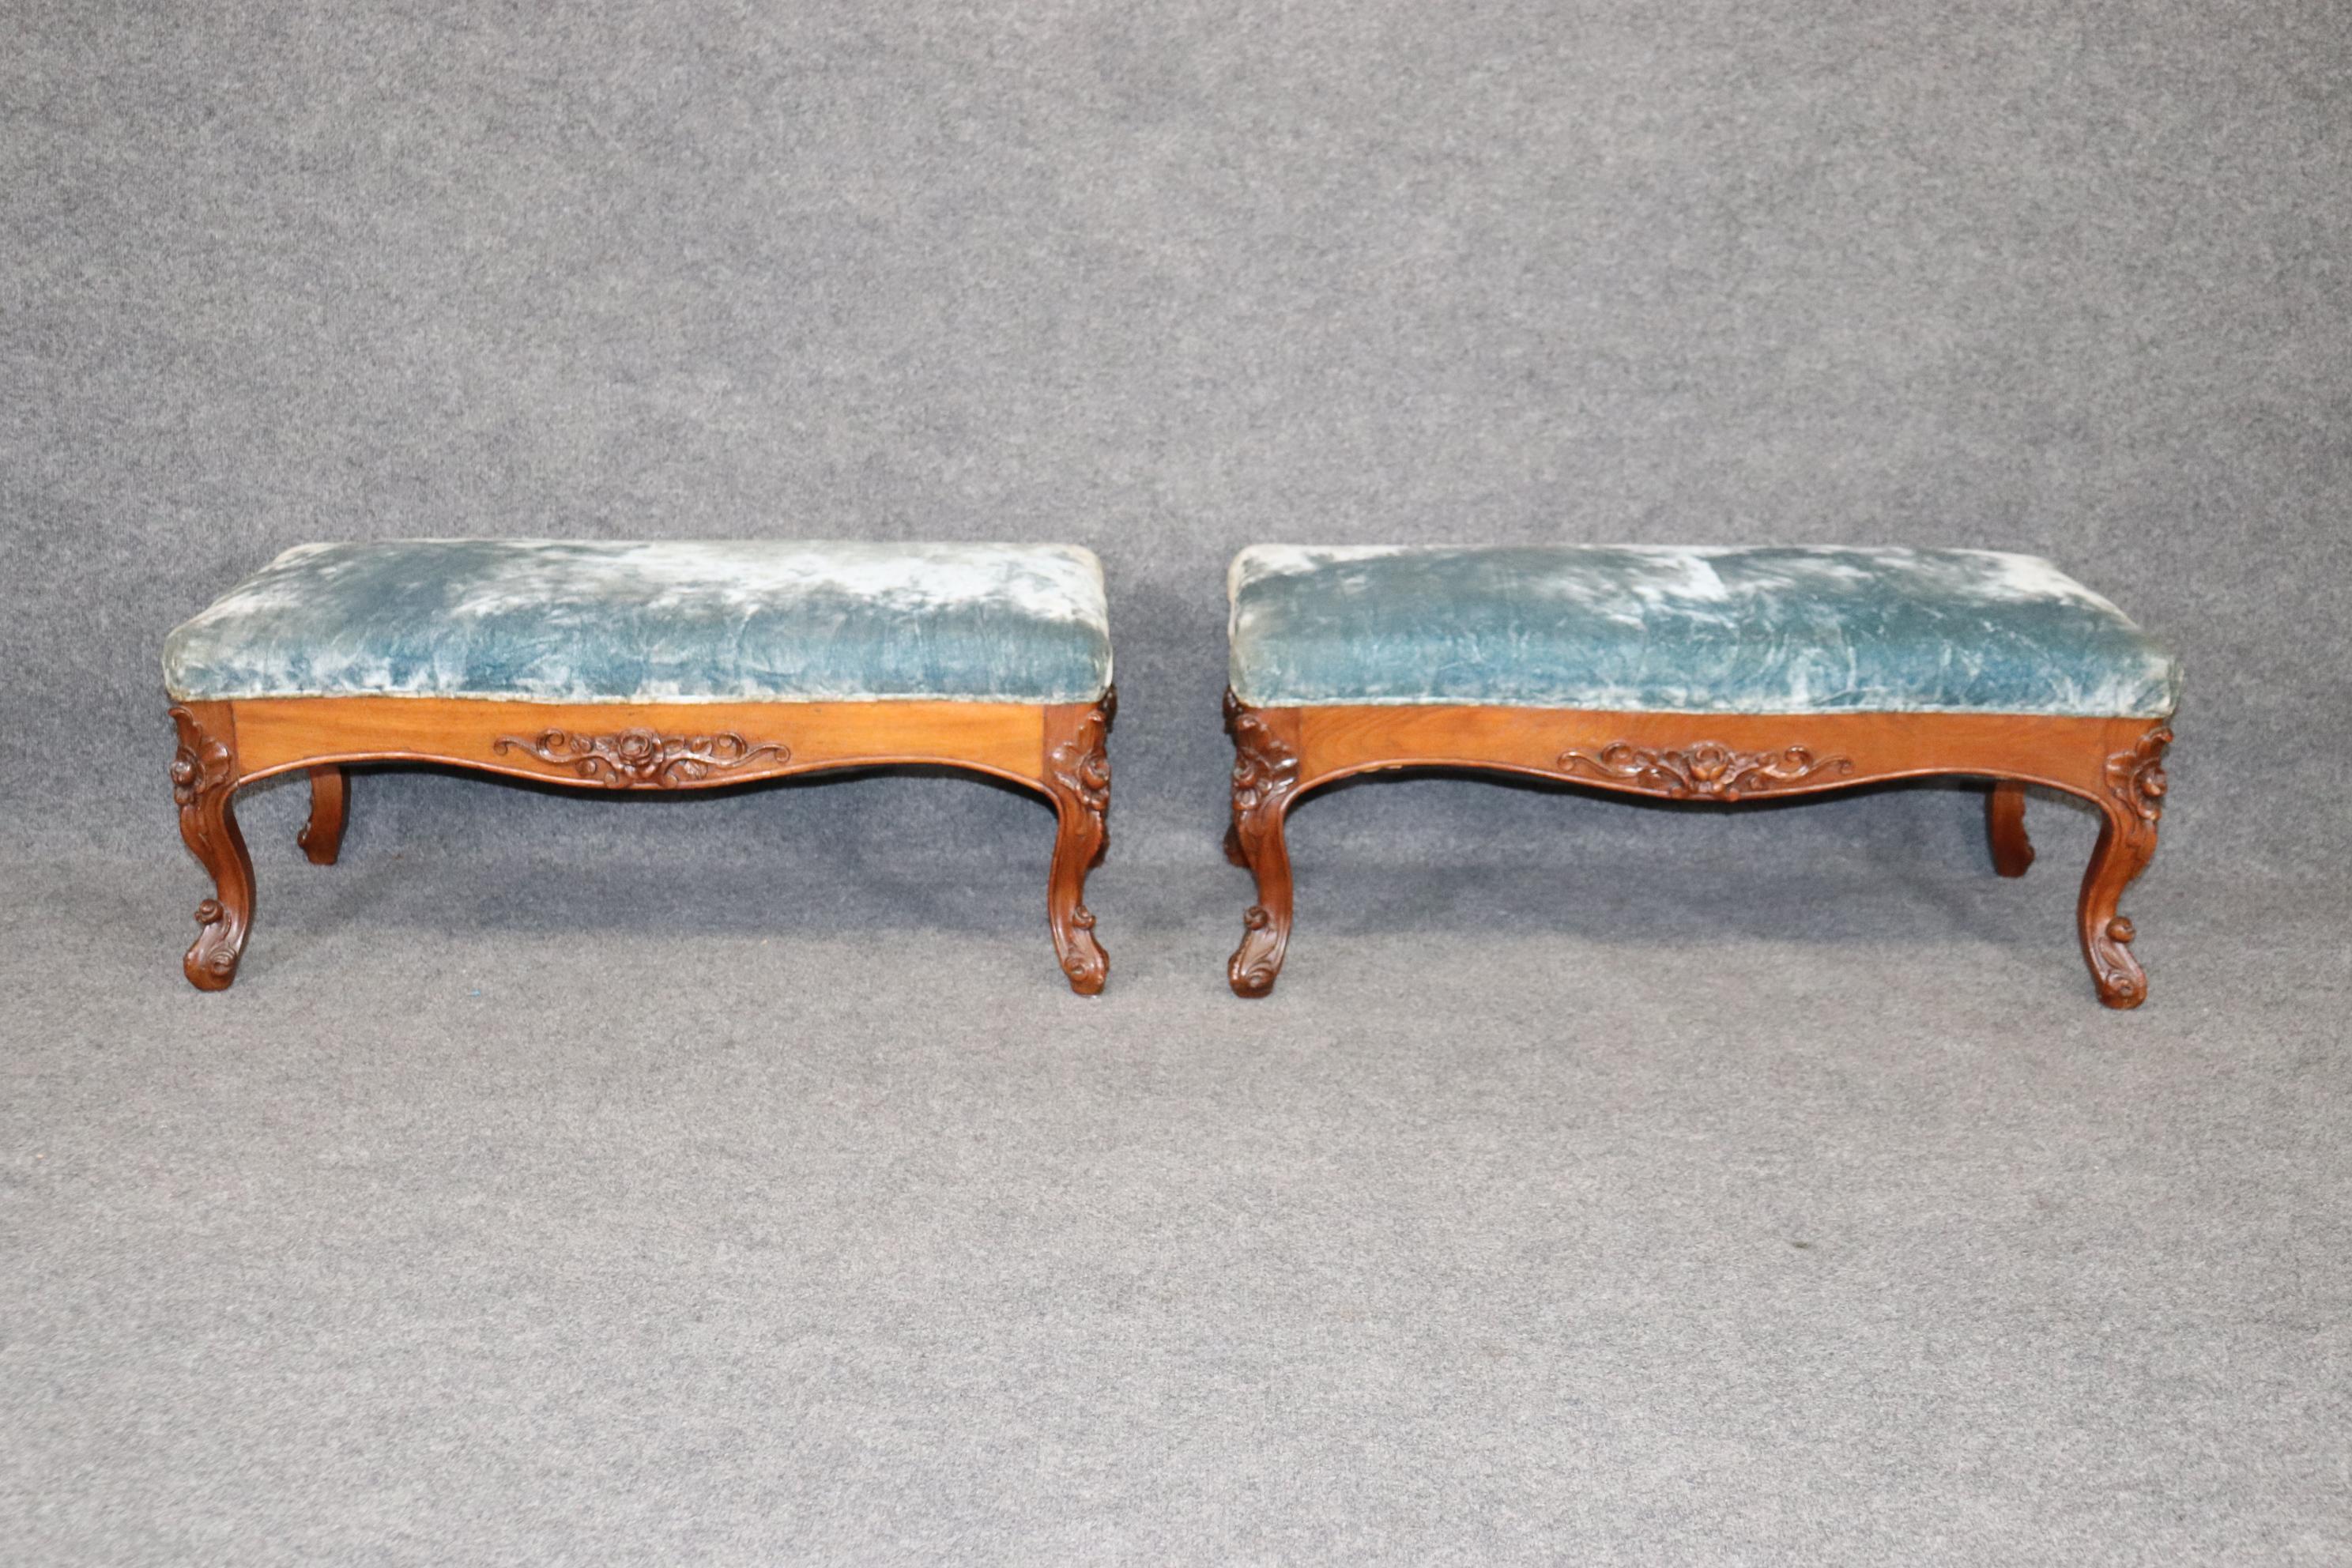 Pair of Rare Walnut American Victorian Foot Stools Attributed to Belter  For Sale 1